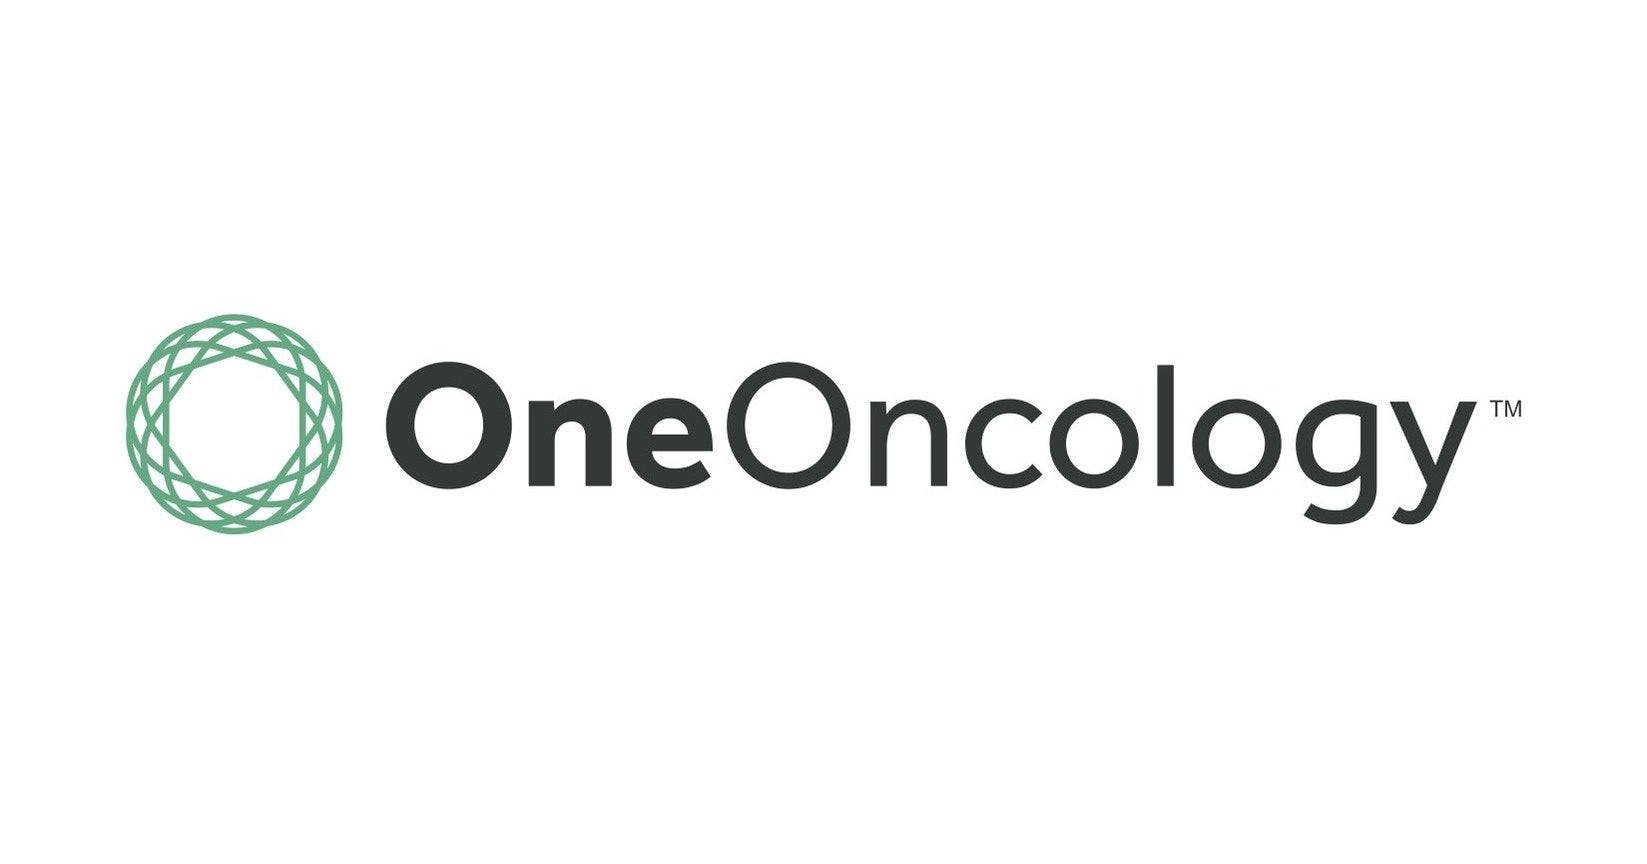 OneOncology logo | Image credit: OneOncology